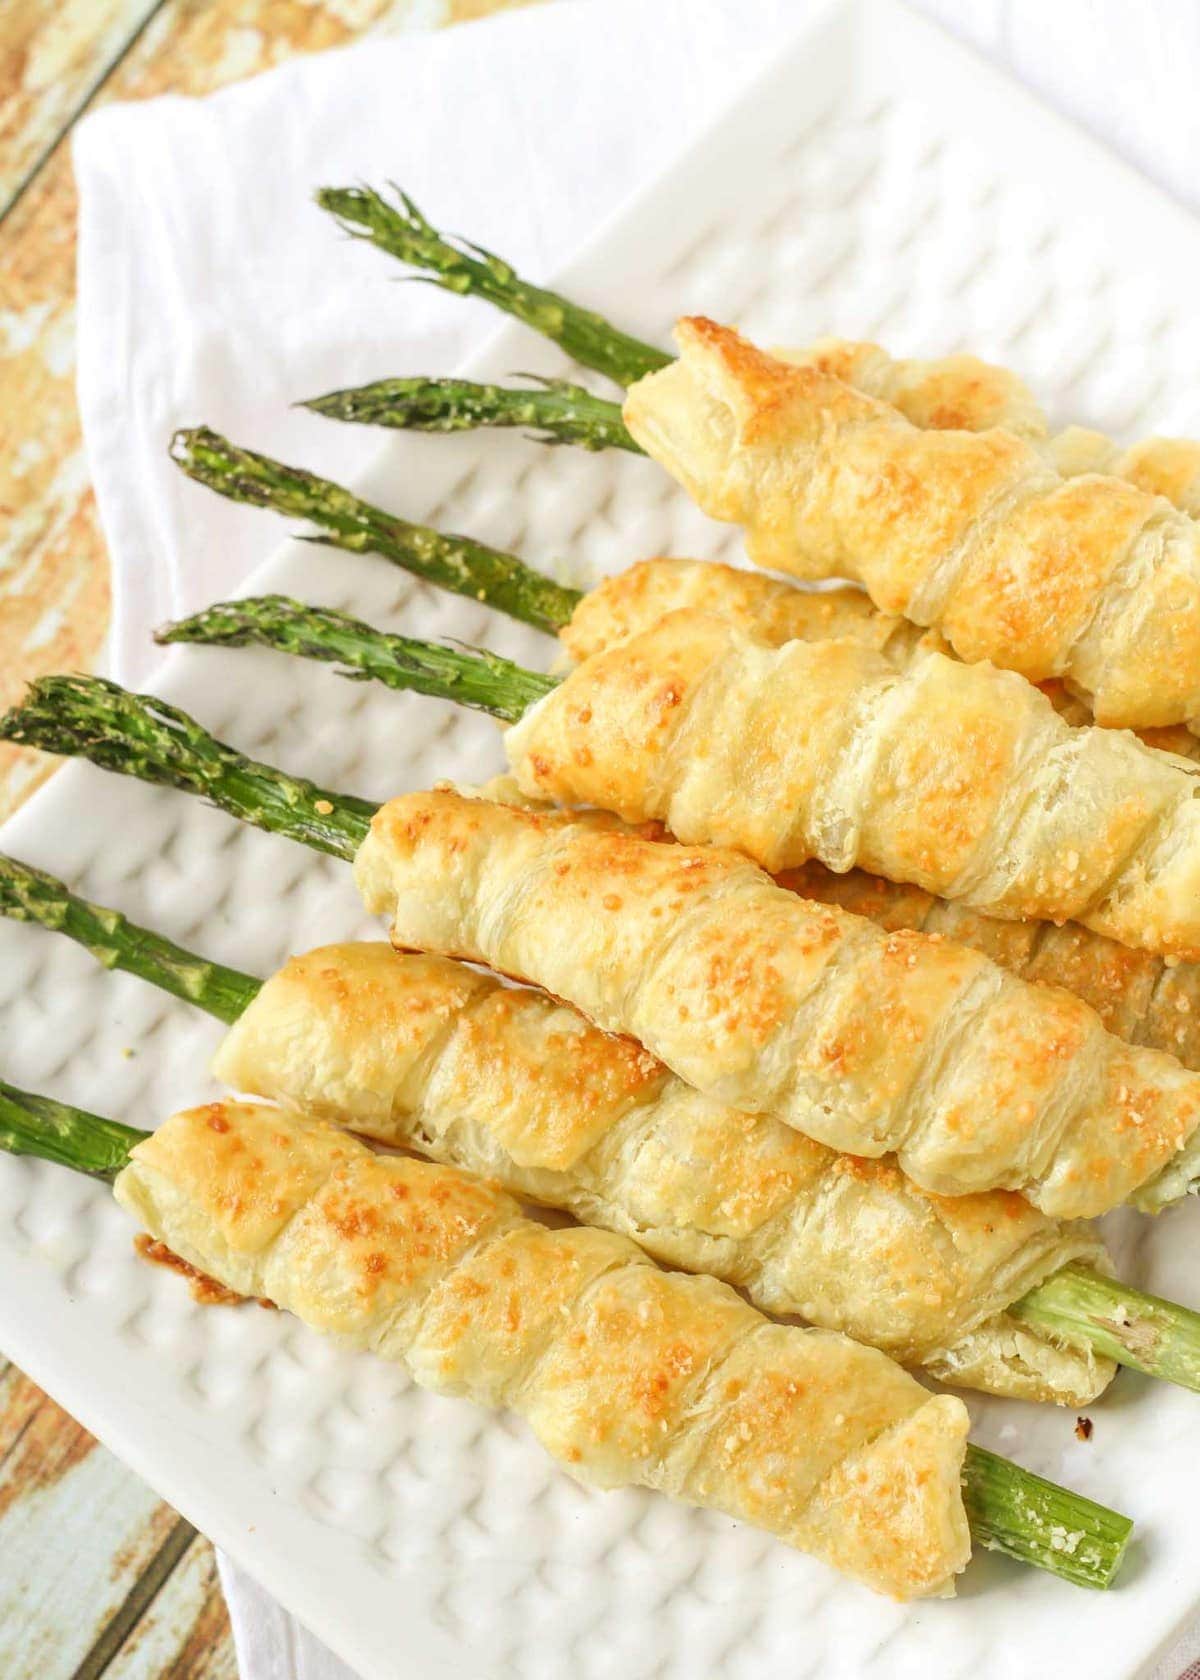 Asparagus roll ups on white plate